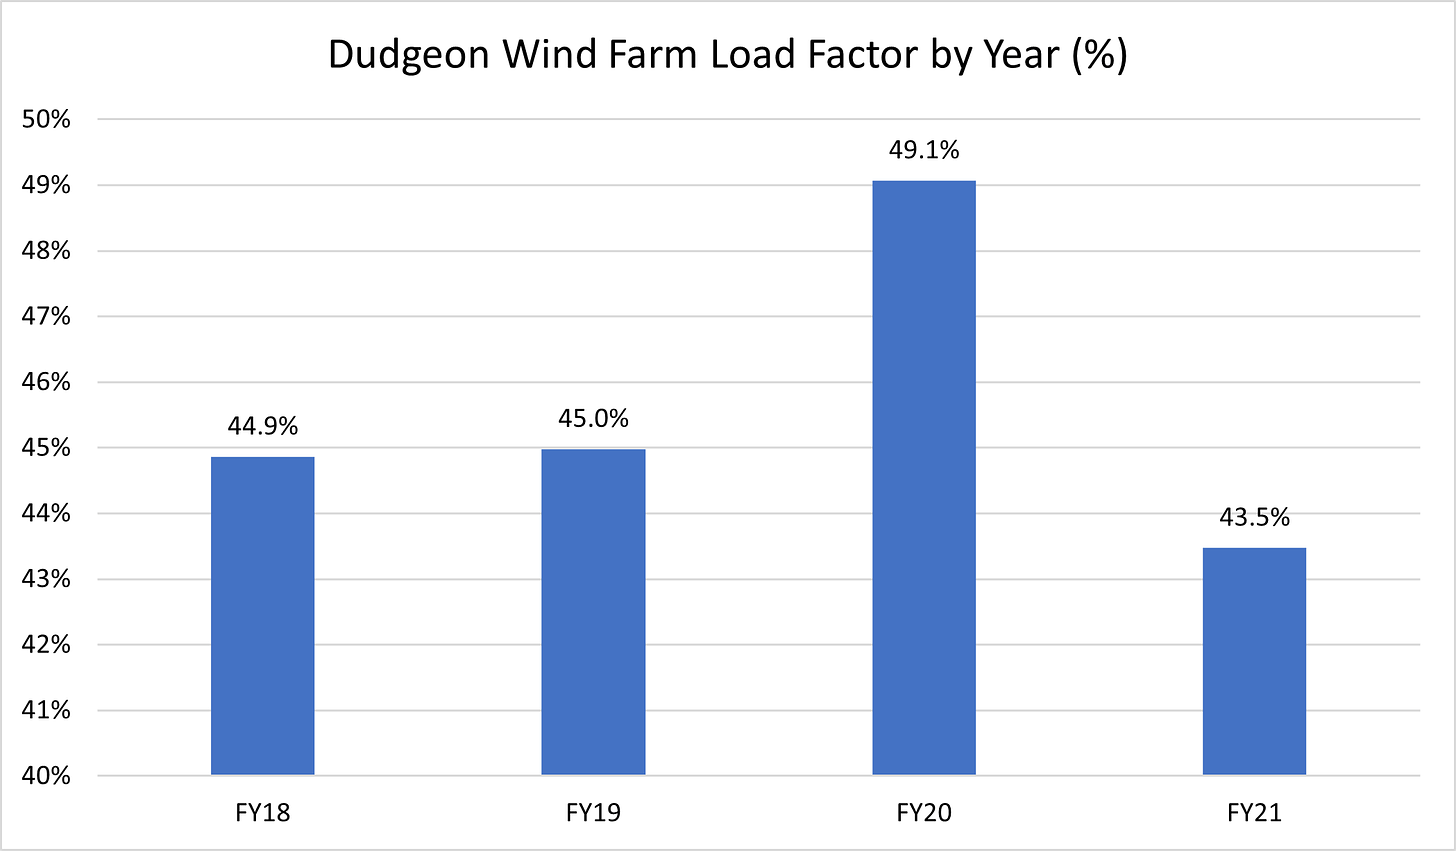 Figure 7 - Dudgeon Wind Farm Load Factor by Year